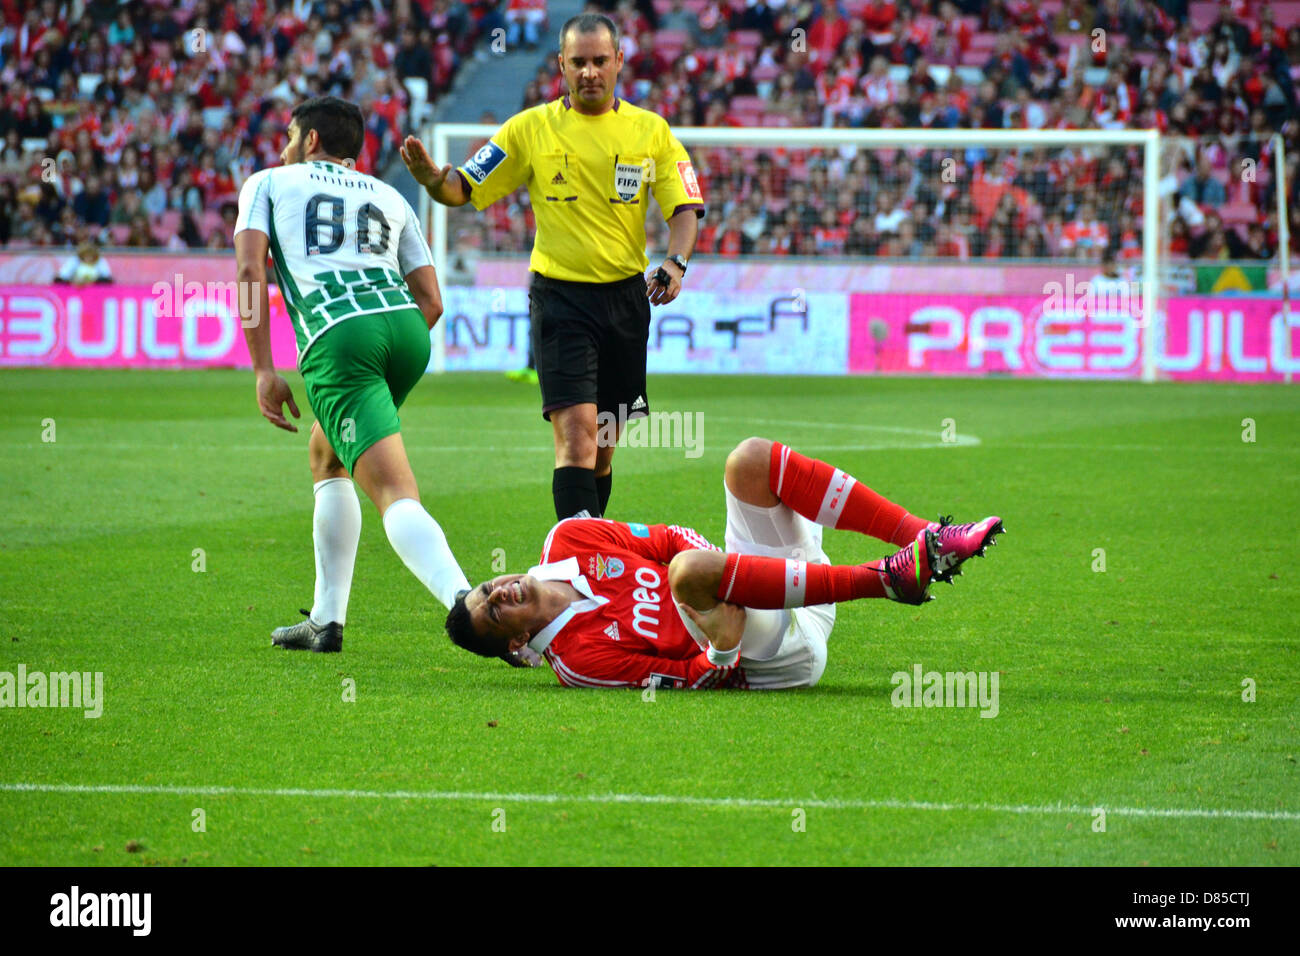 Cardozo , Benfica player, suffered a failure and had to be assisted out the field Stock Photo